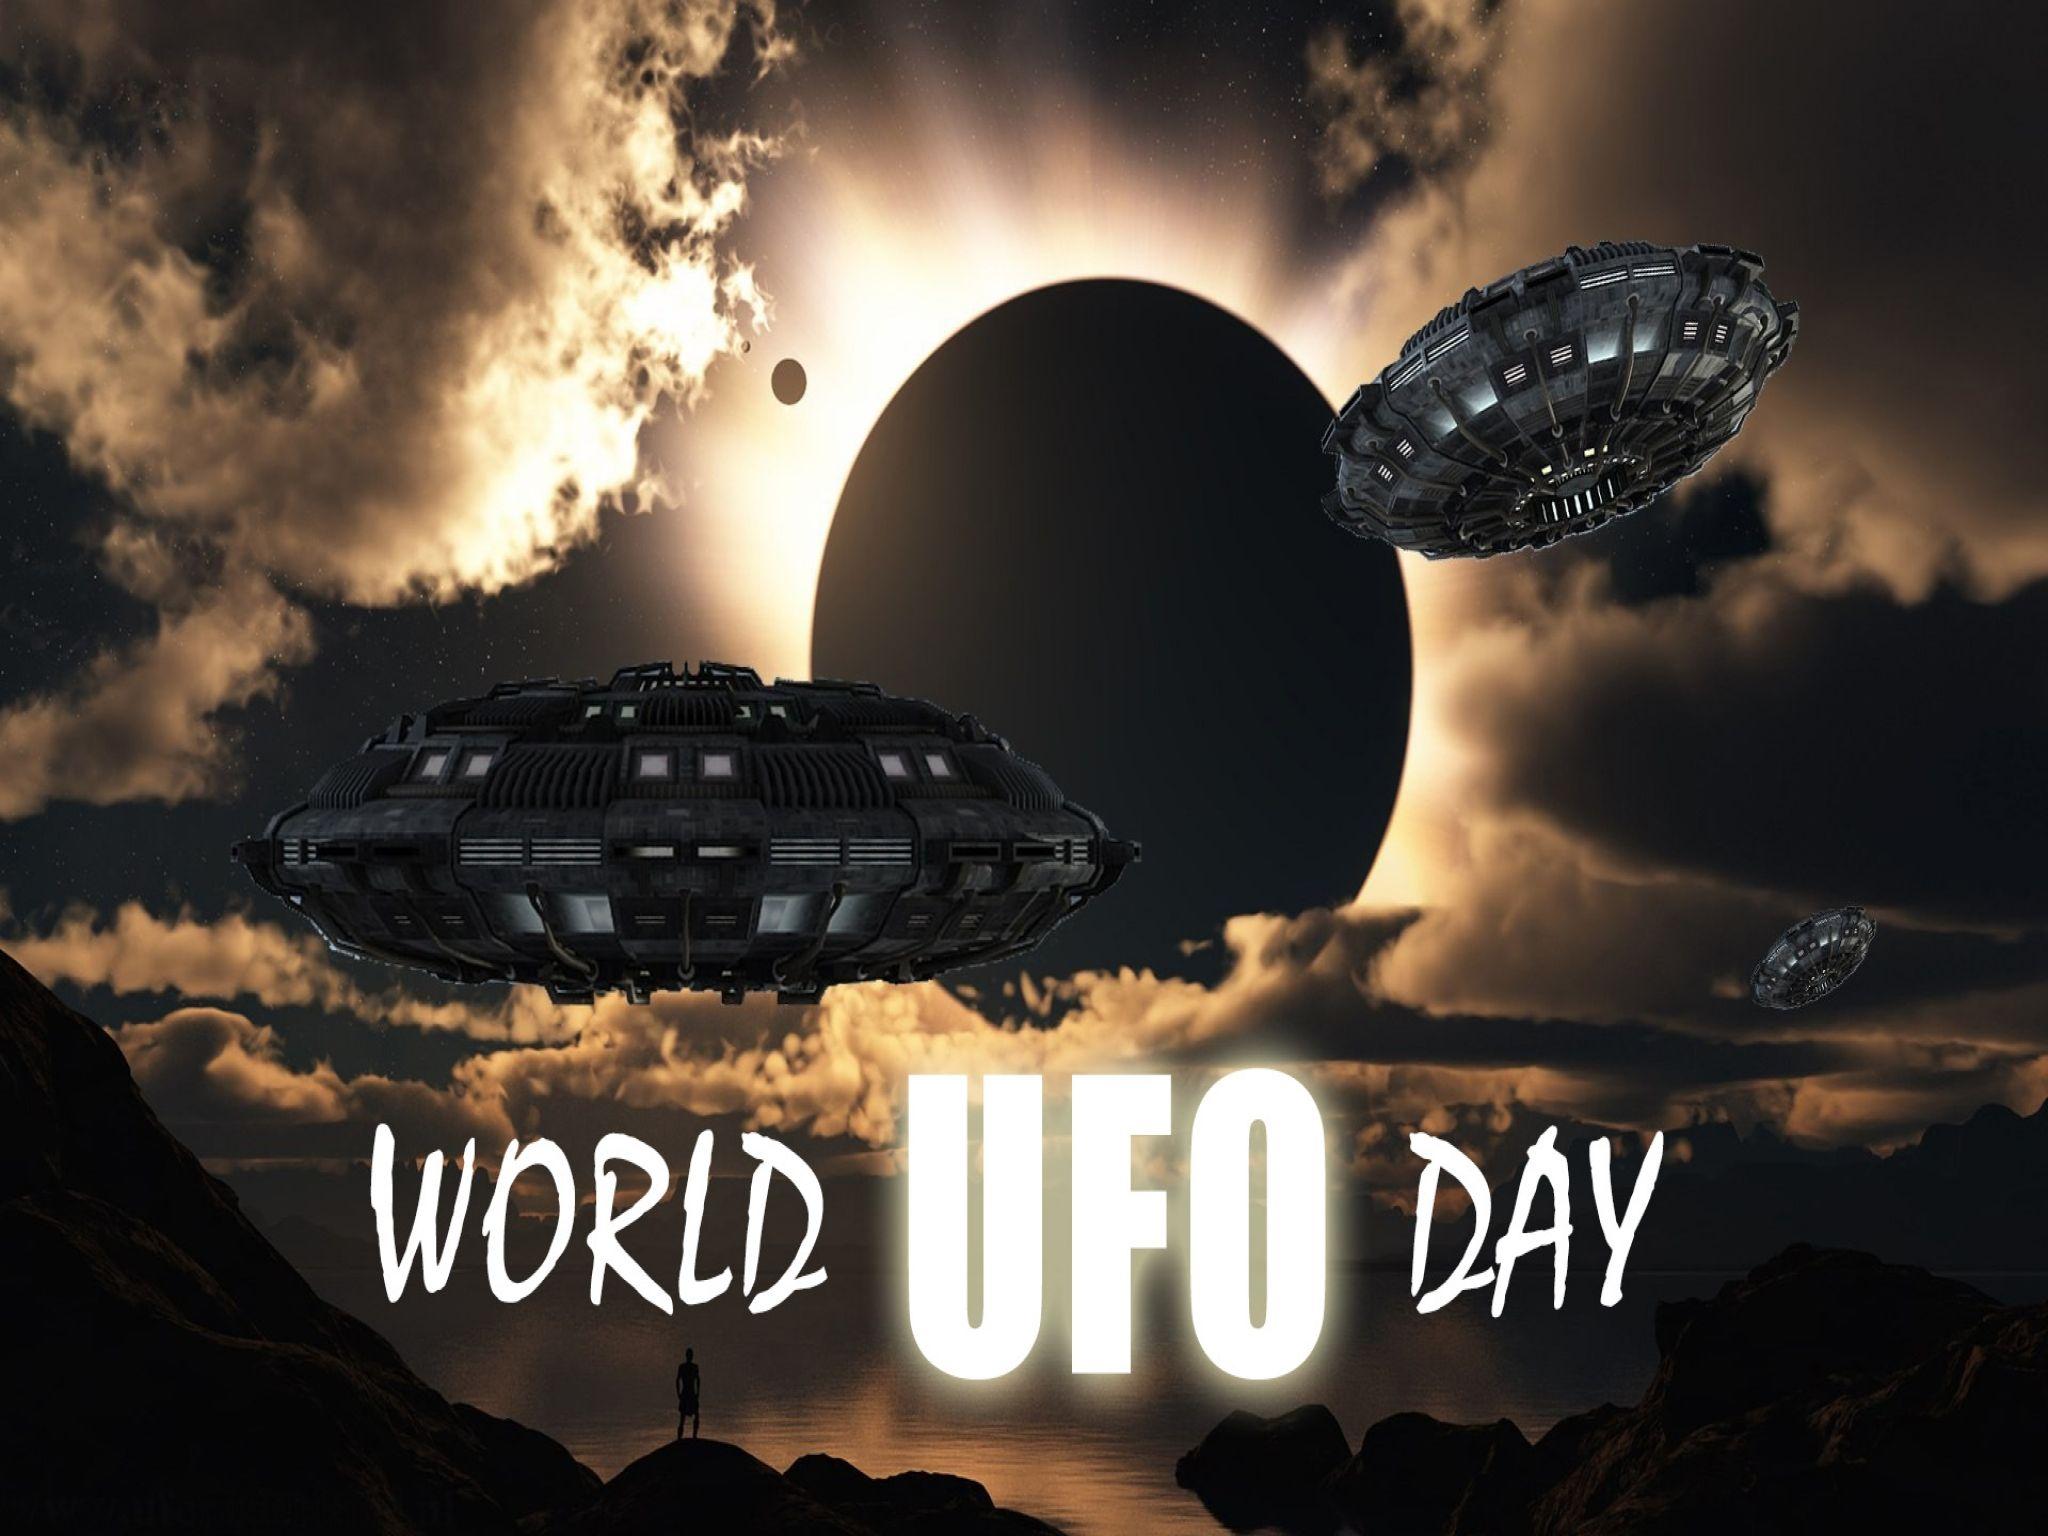 World Ufo Day Unidentified Flying Object Saucers Sky HD Wallpaper